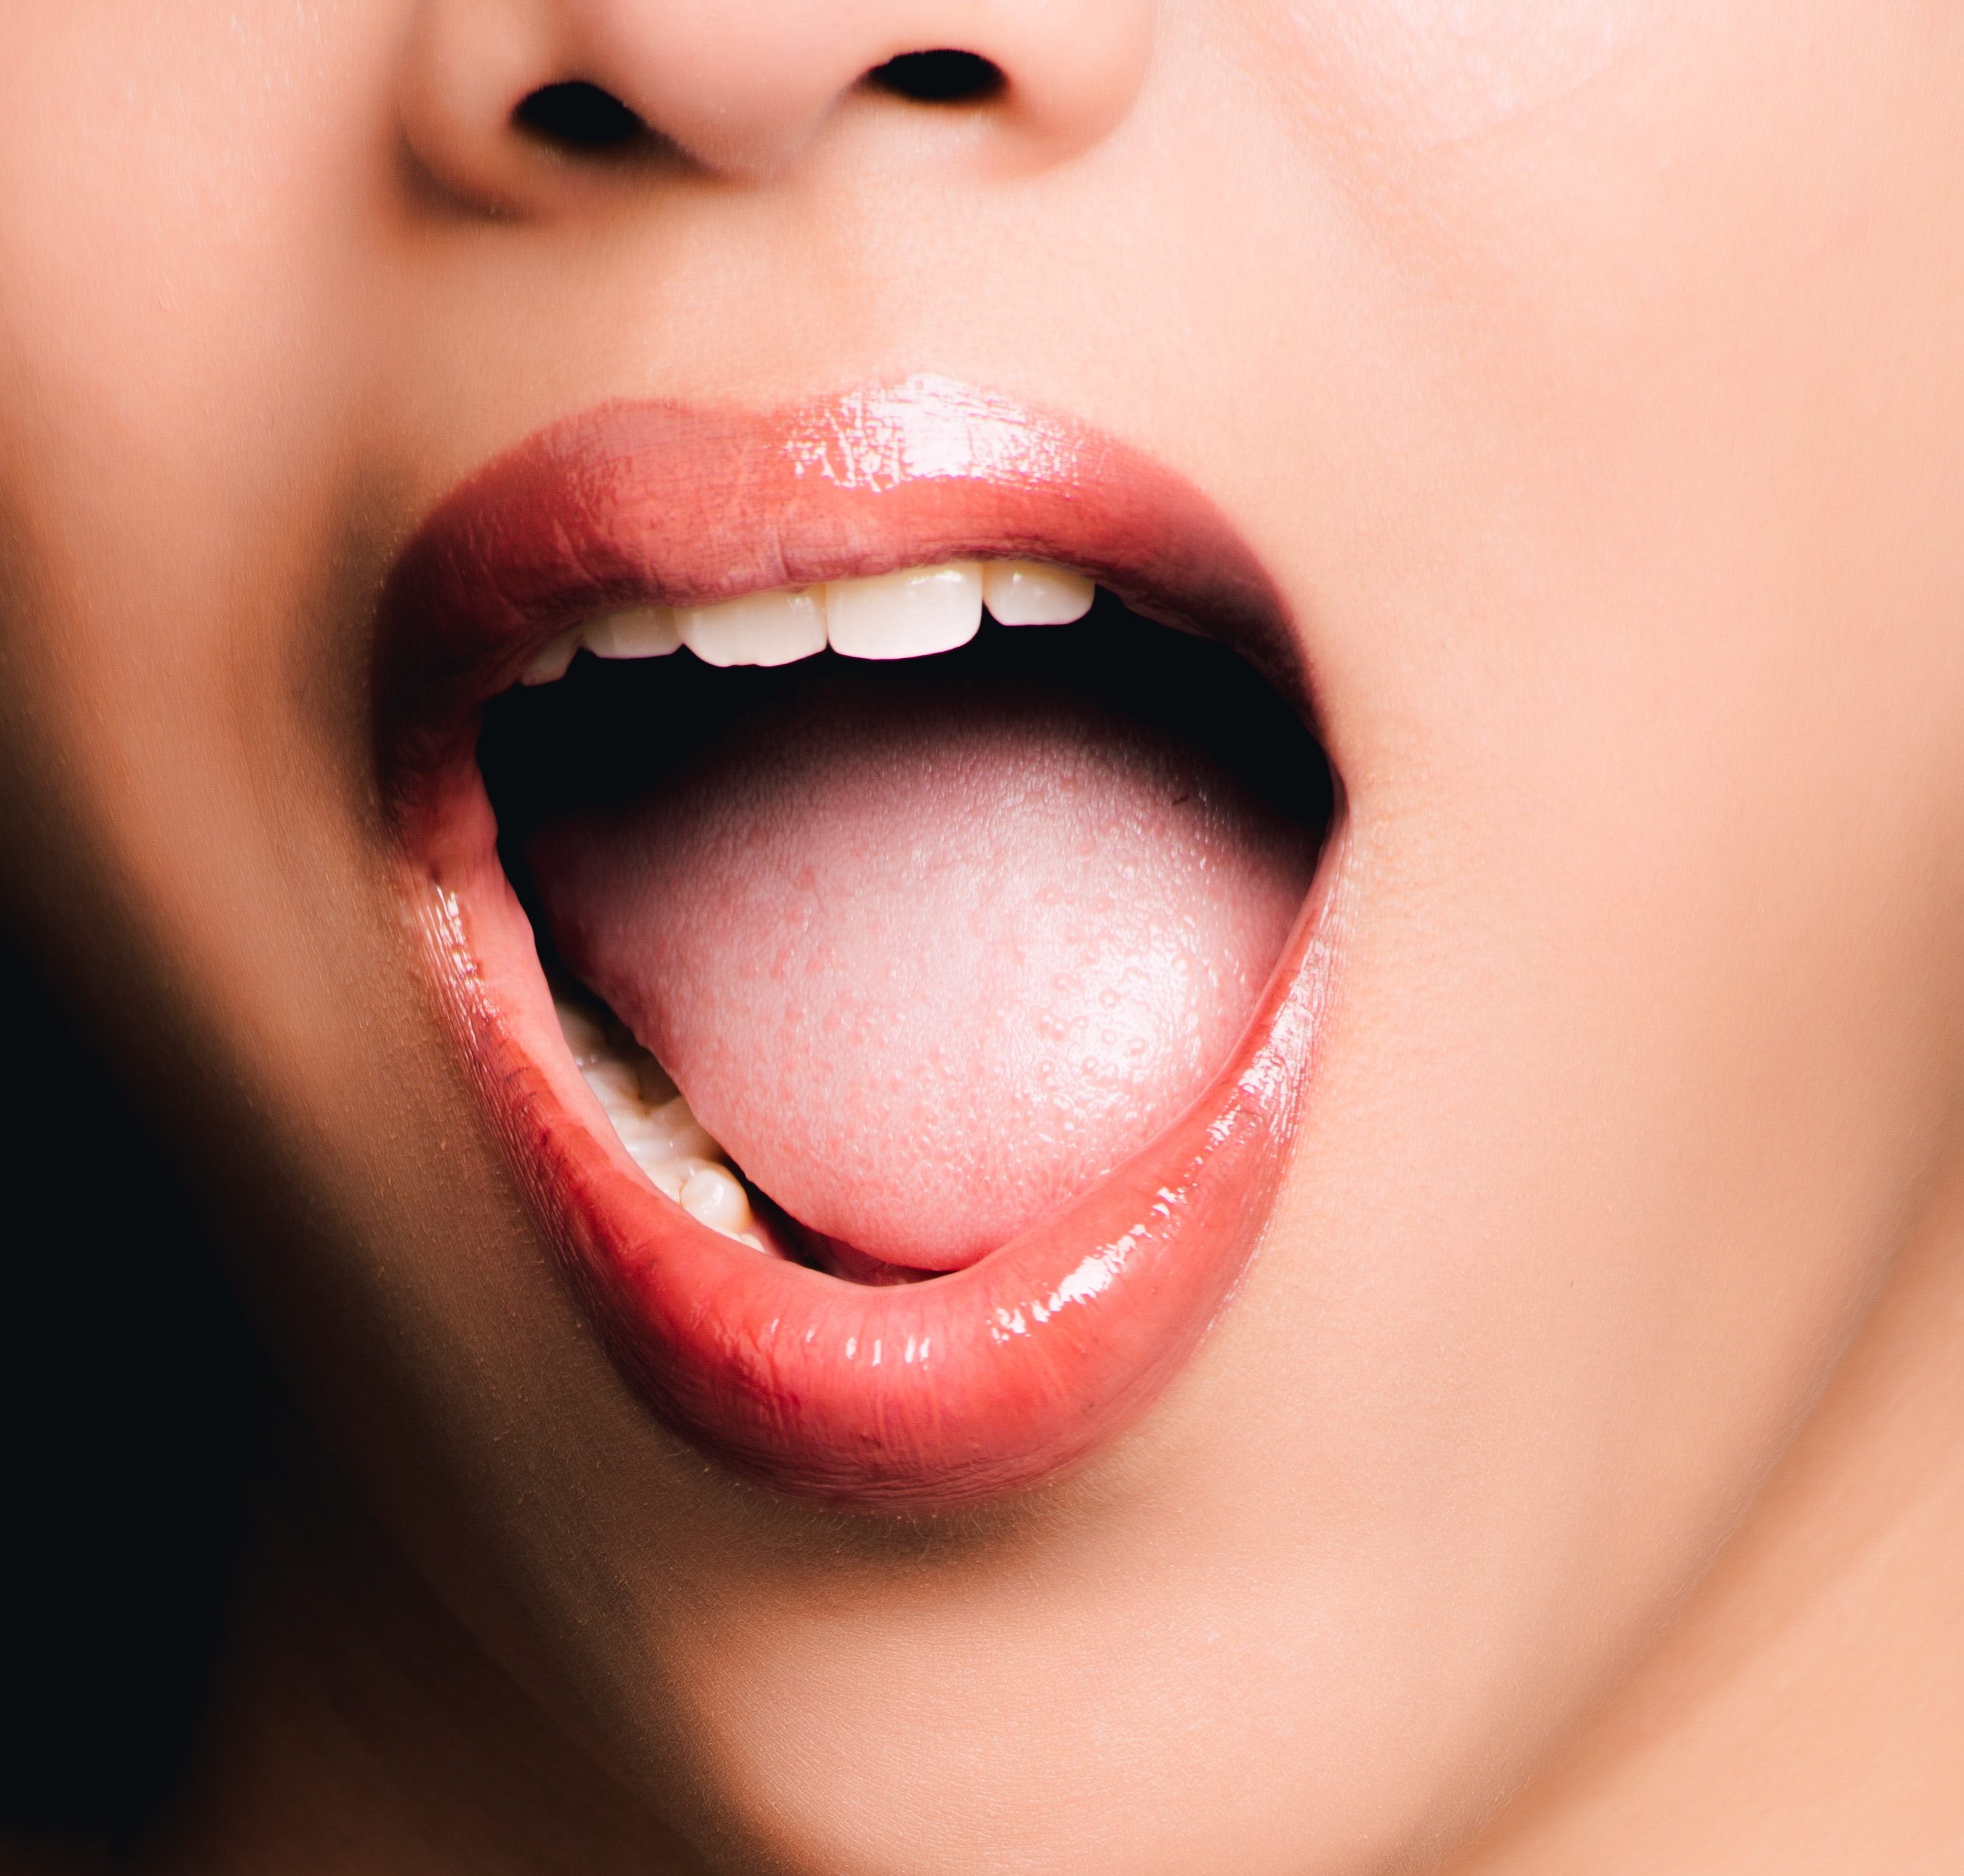 Twitching Tongue: When to Worry About ALS